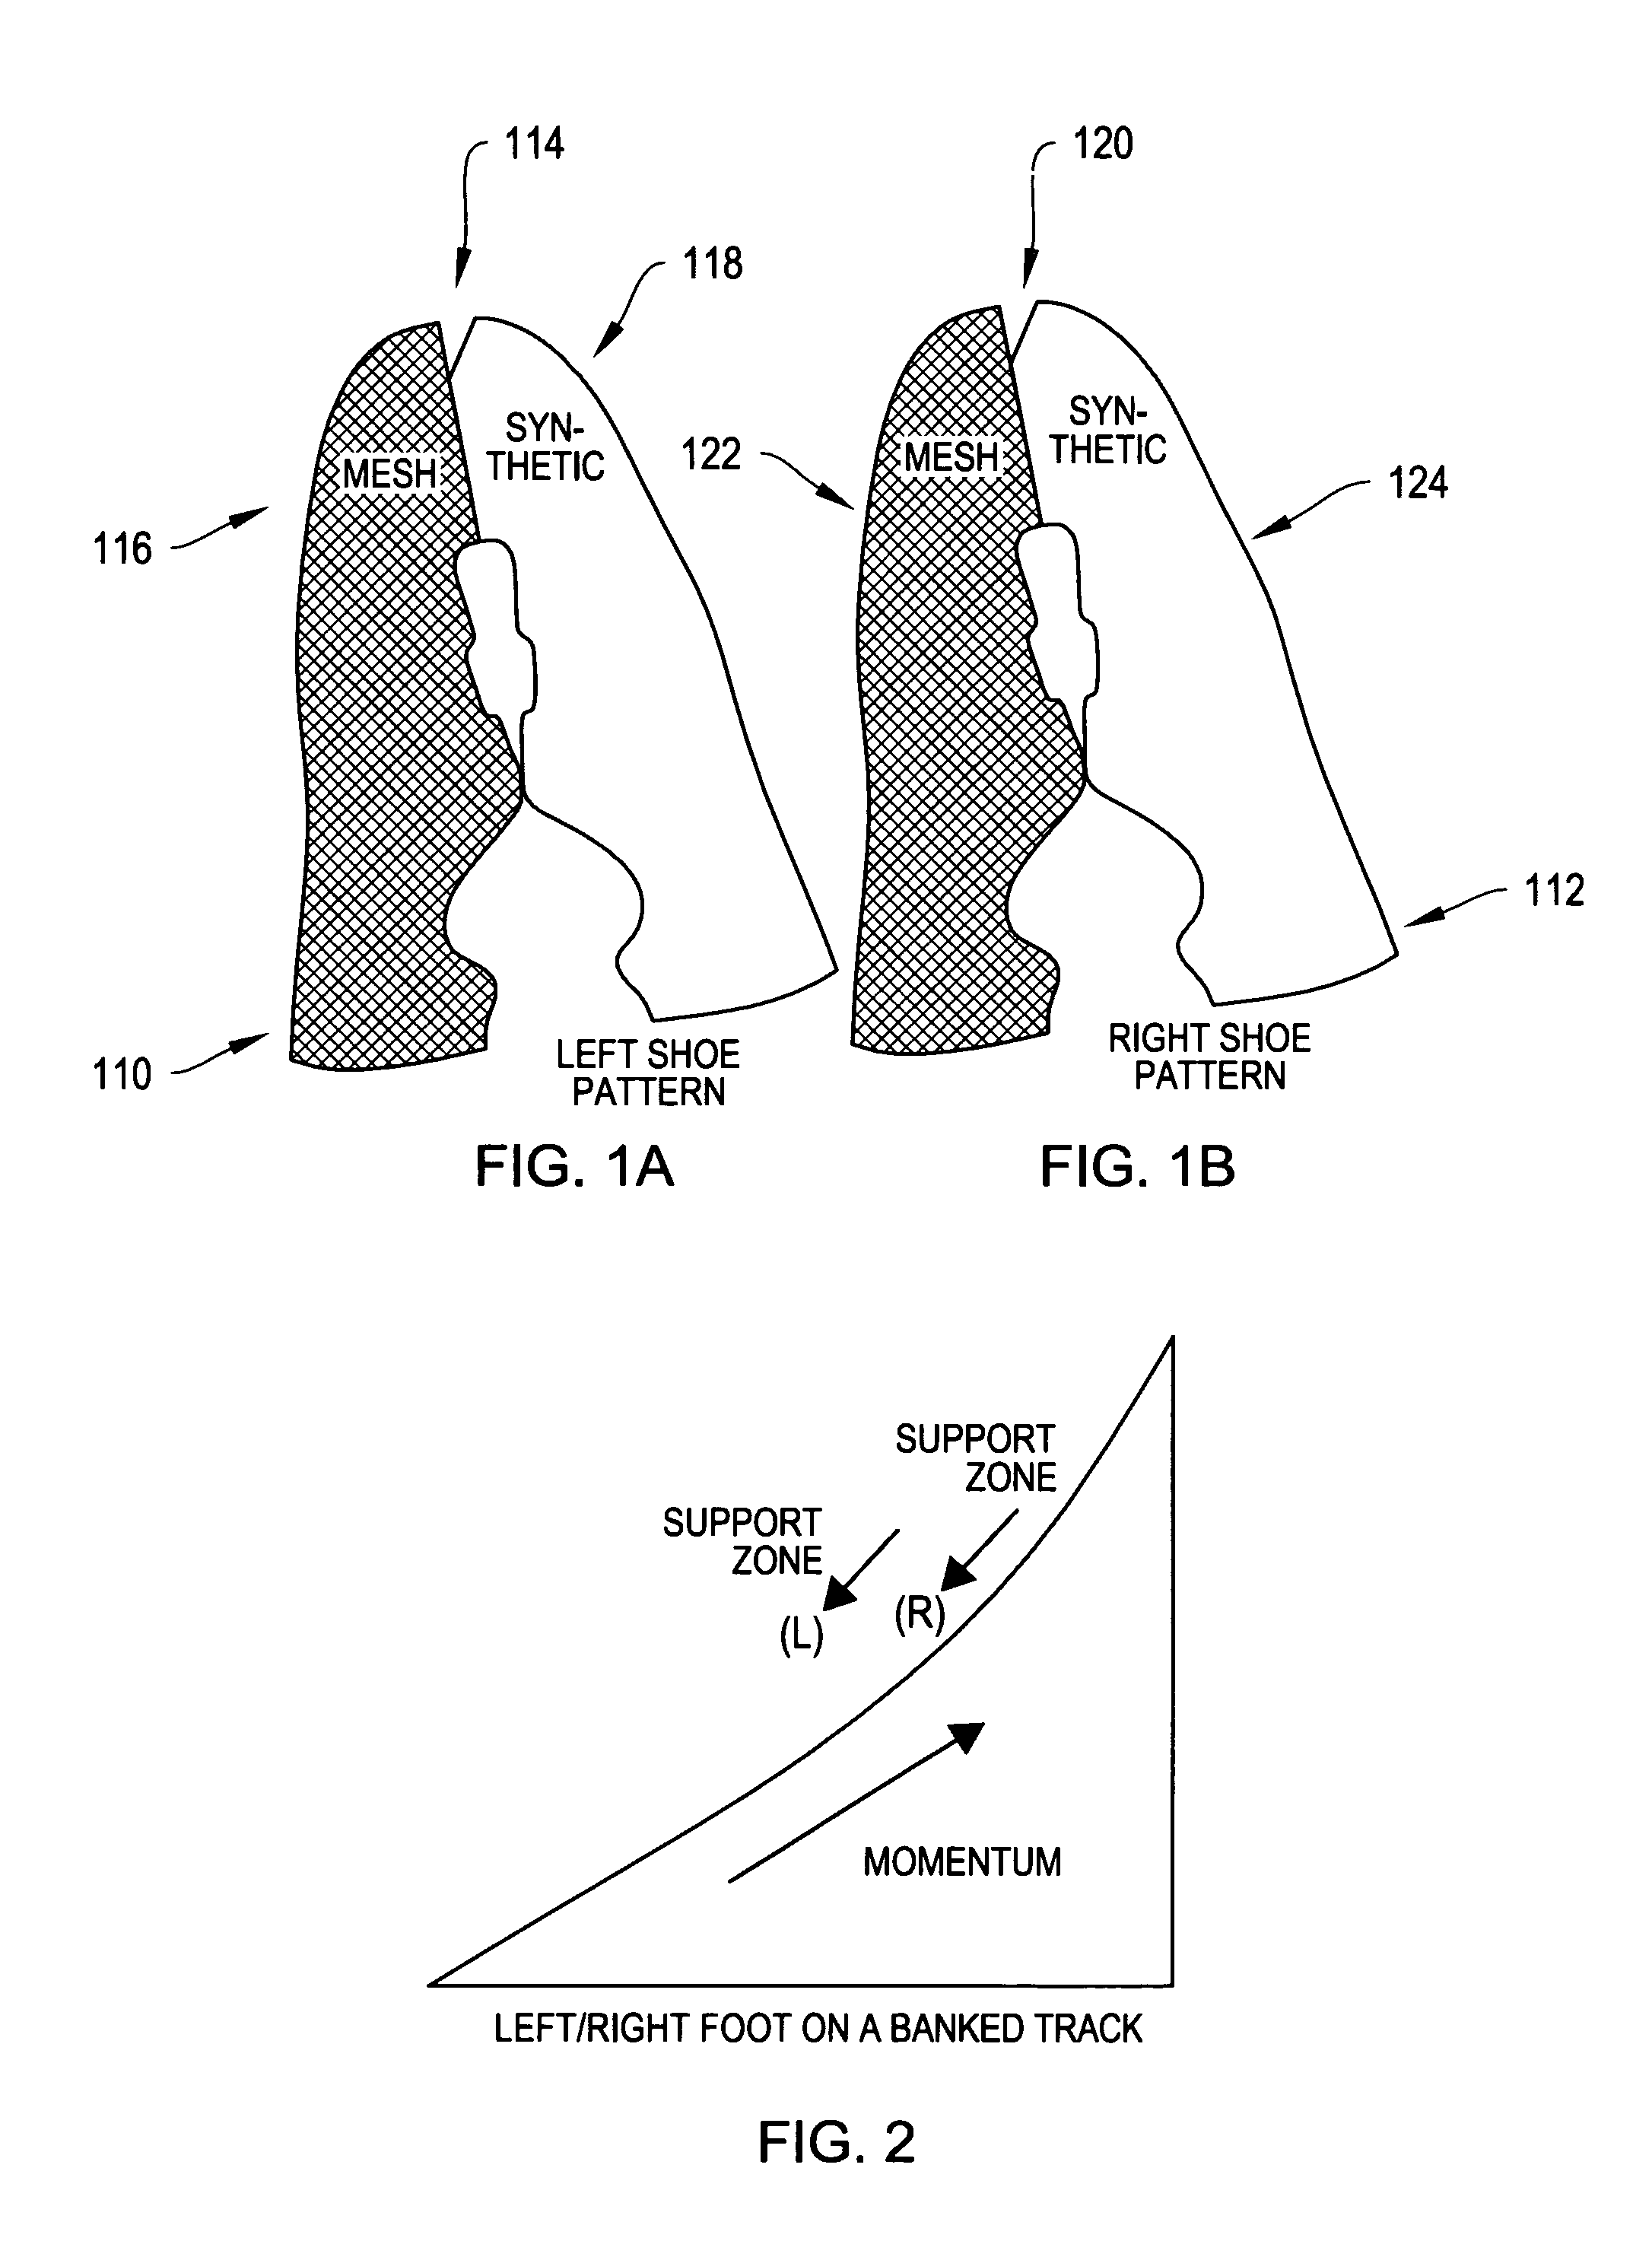 Pair of athletic shoes with asymmetric support between the uppers of the pair